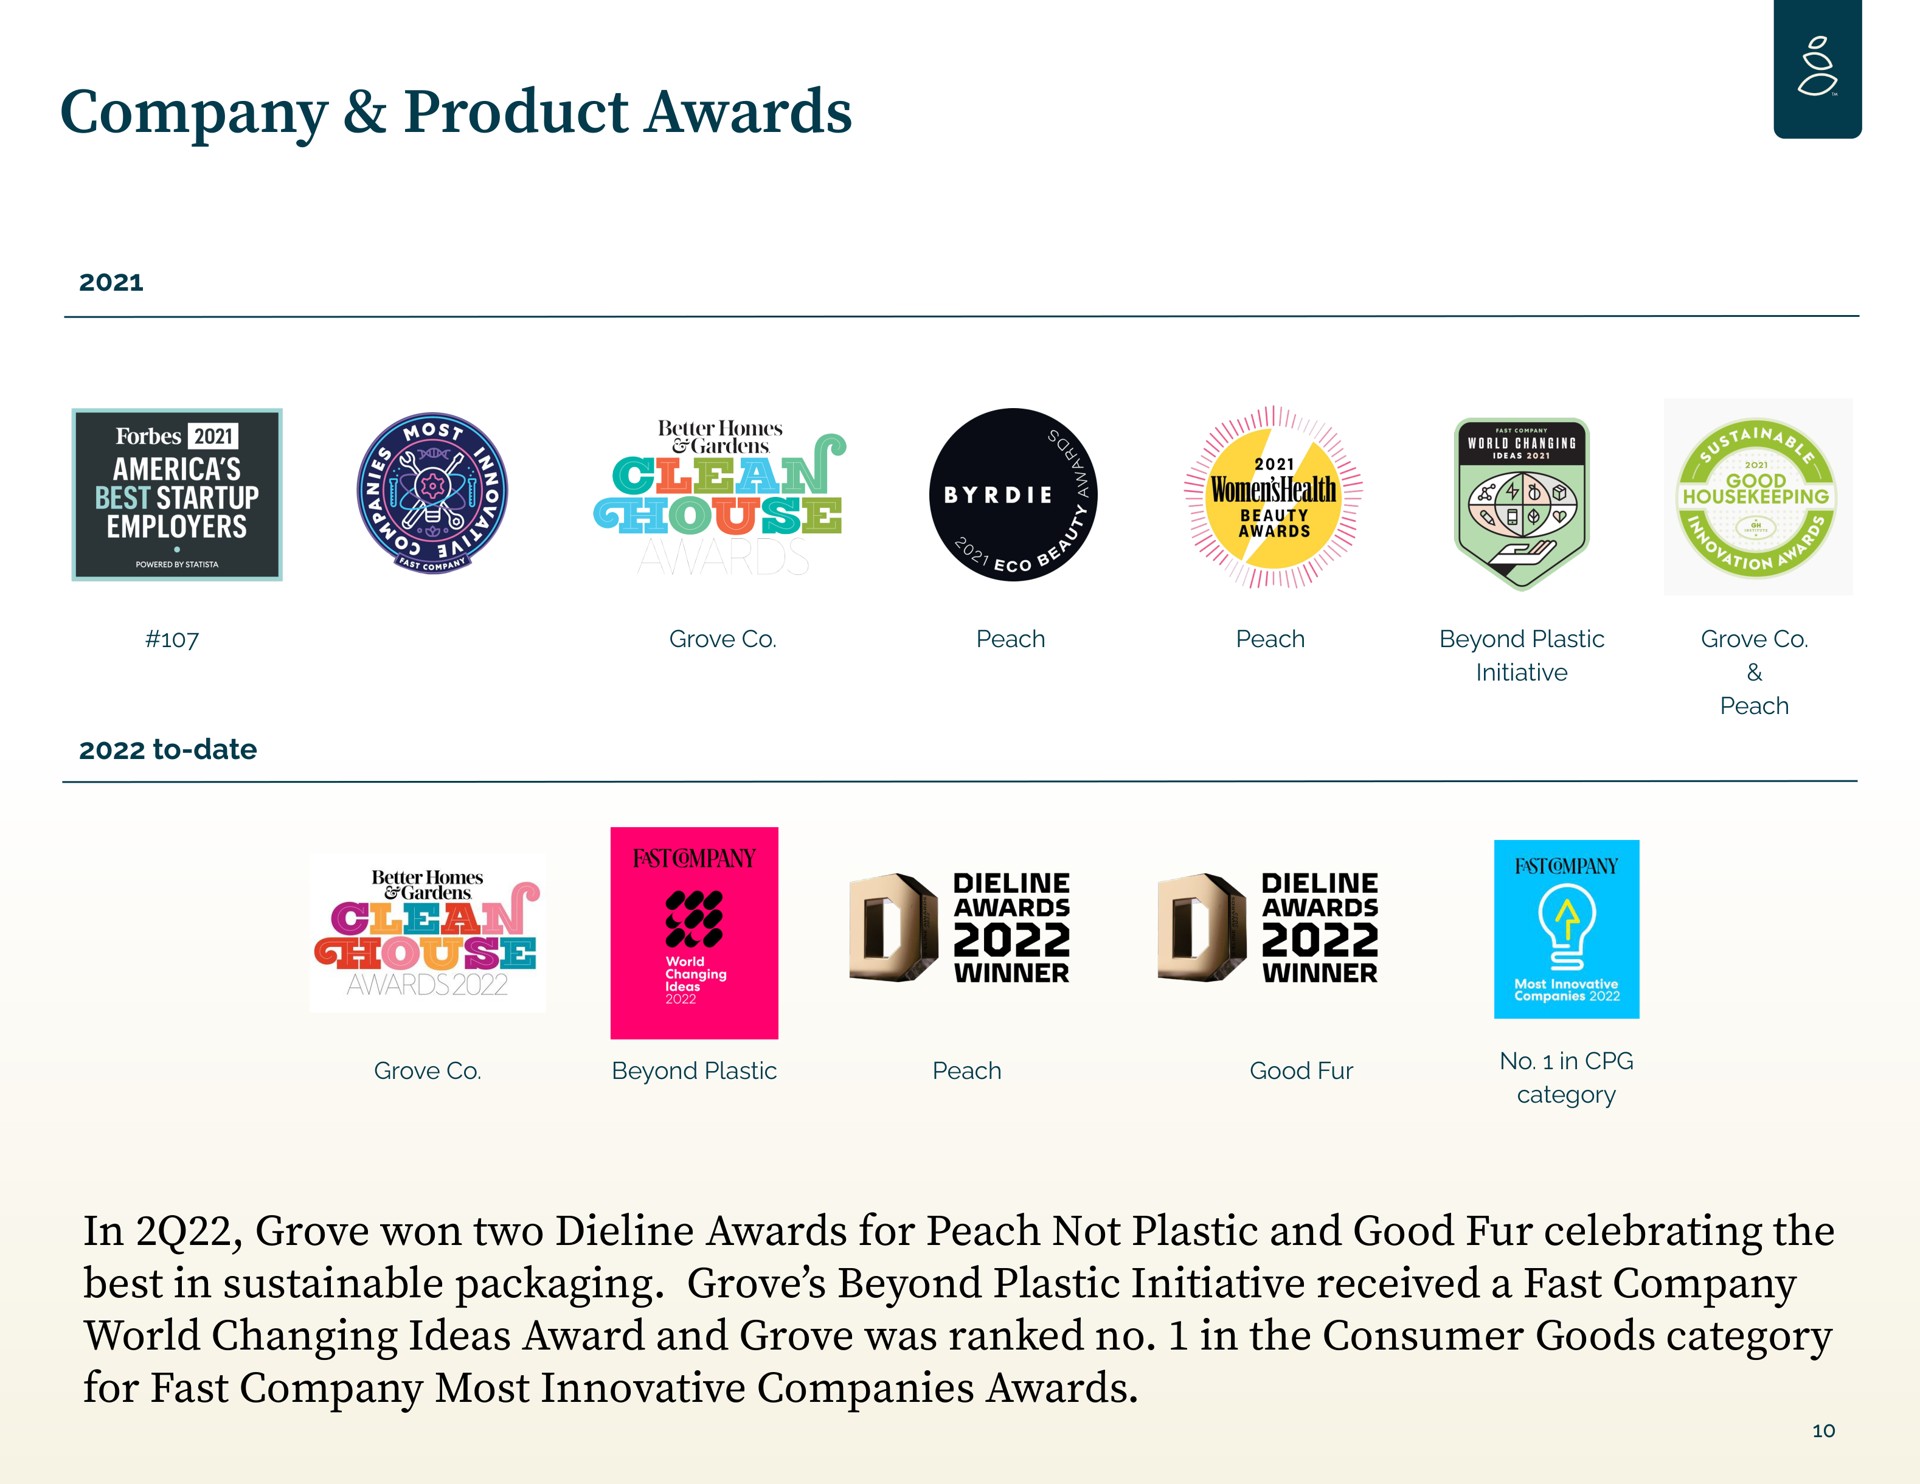 company product awards in grove won two awards for peach not plastic and good fur celebrating the best in sustainable packaging grove beyond plastic initiative received a fast company world changing ideas award and grove was ranked no in the consumer goods category for fast company most innovative companies awards chouse winner winner | Grove